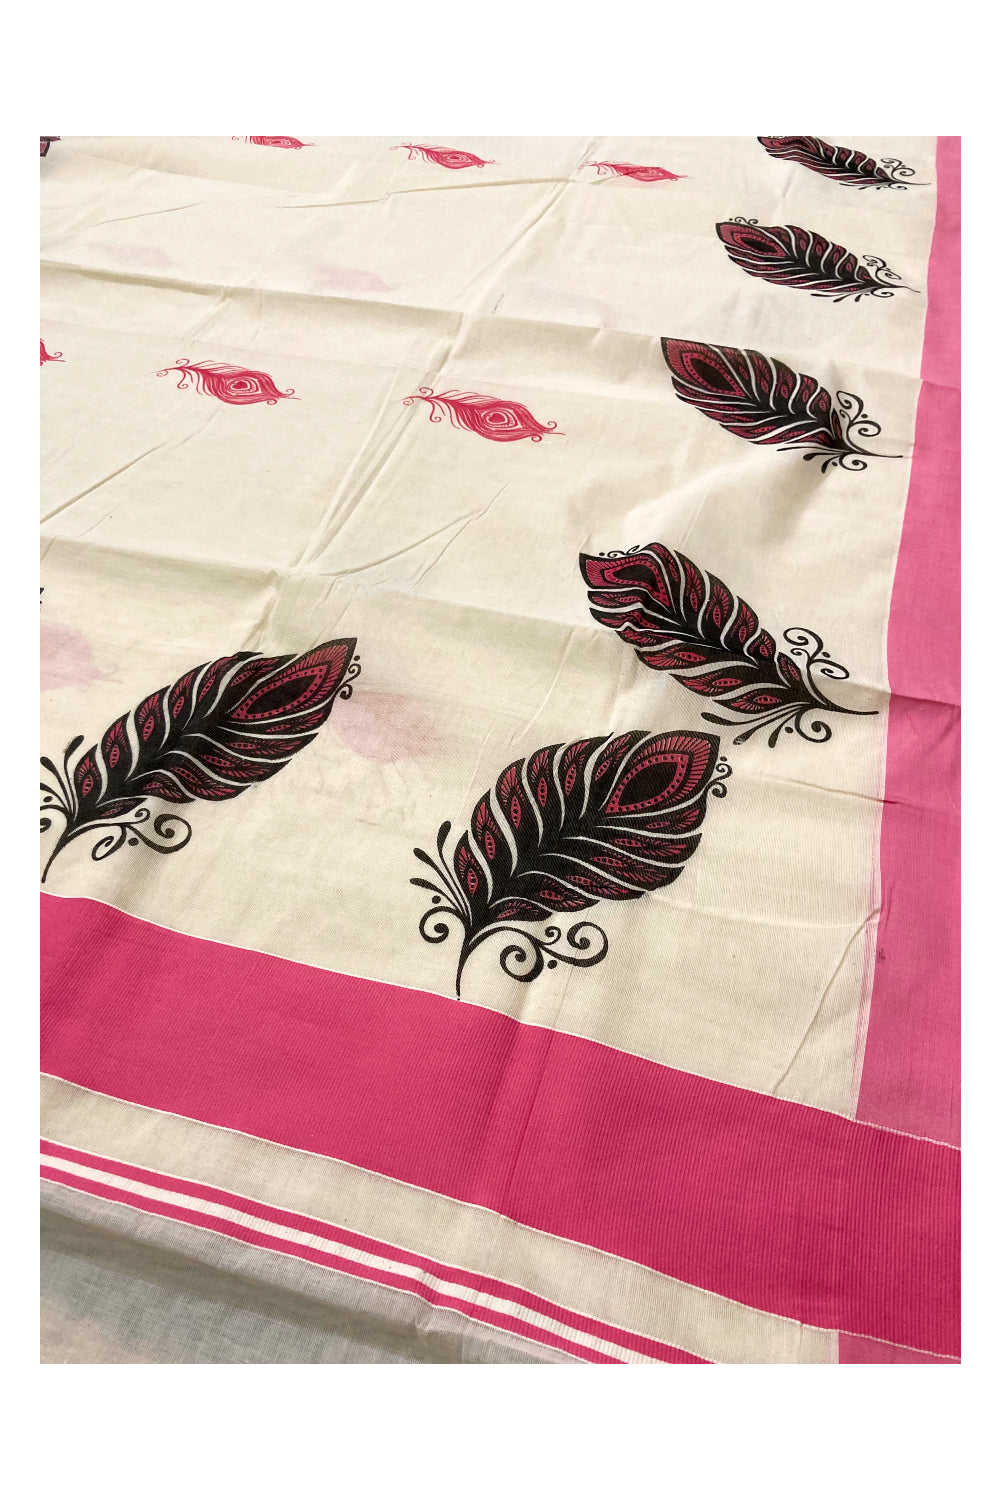 Pure Cotton Kerala Saree with Feather Block Printed Design and Pink Border